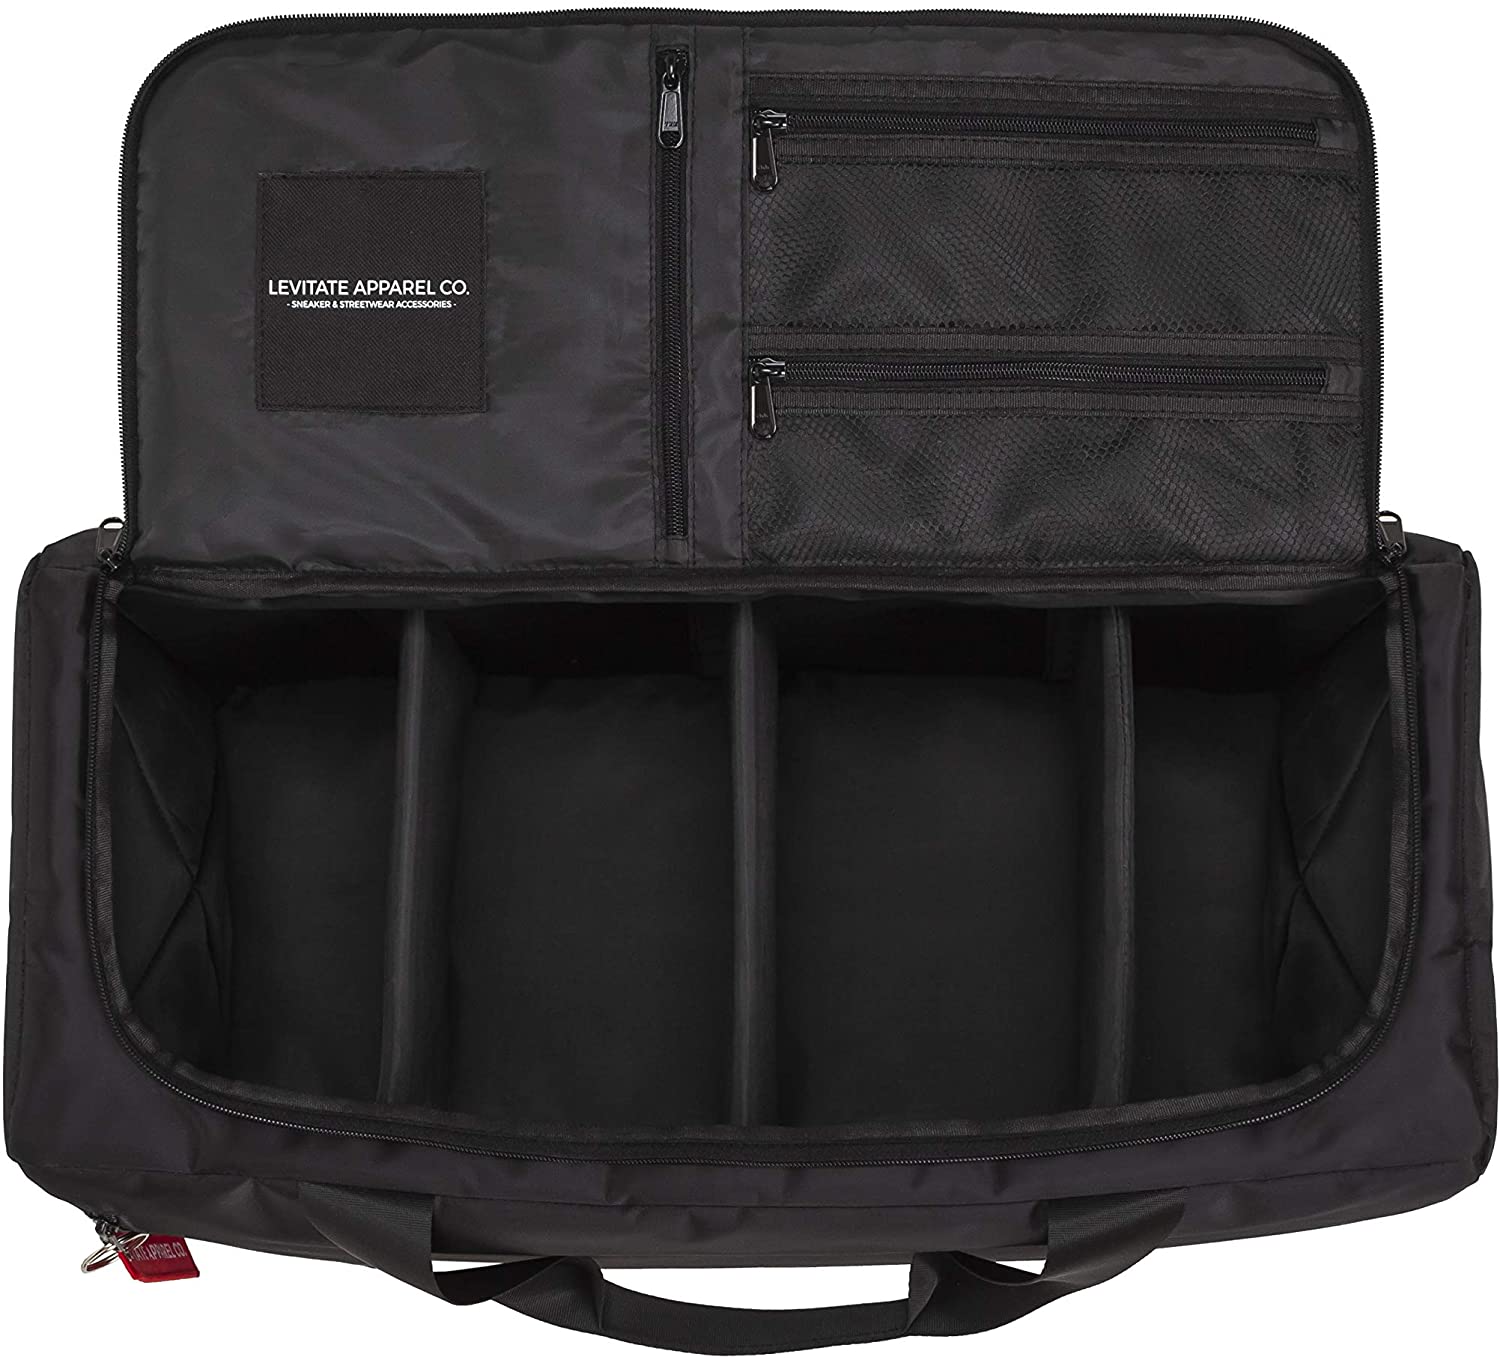 B08BFJ9KDD SNEAKER BAG - Premium Travel & Gym Duffle with 3 adjustable dividers for shoes, clothing and essentials! (black)